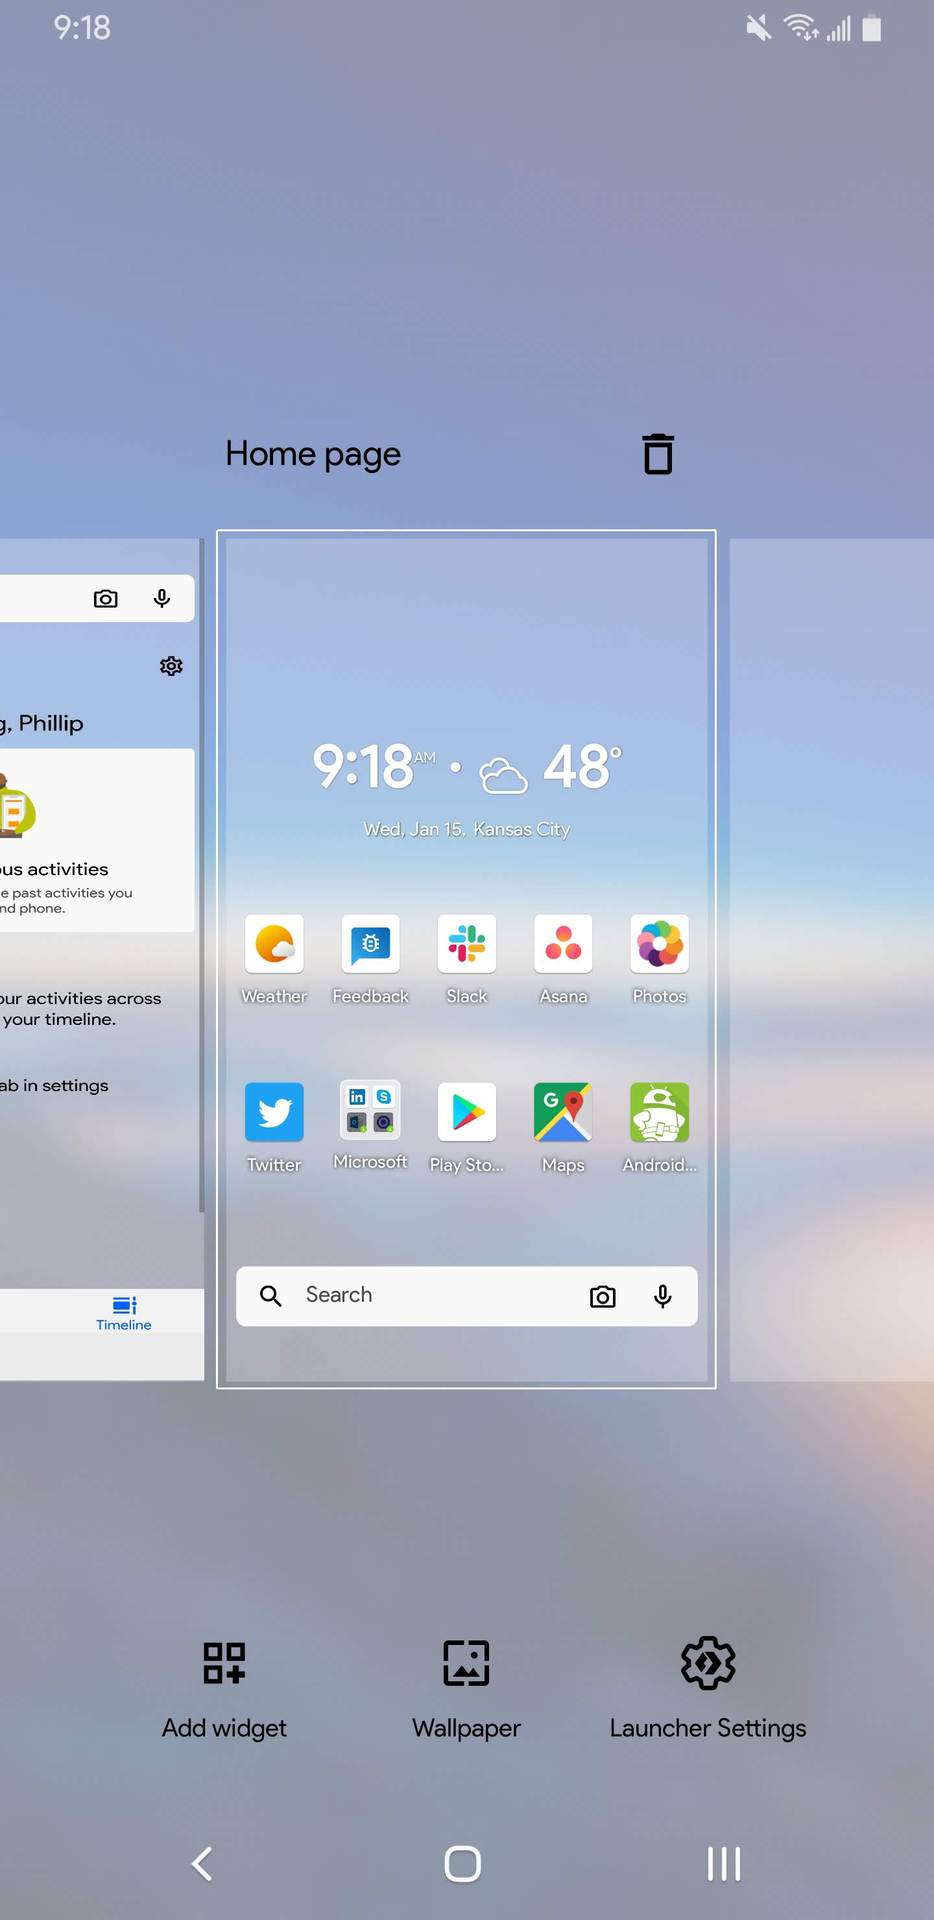 Microsoft Launcher 6.0 home page 2